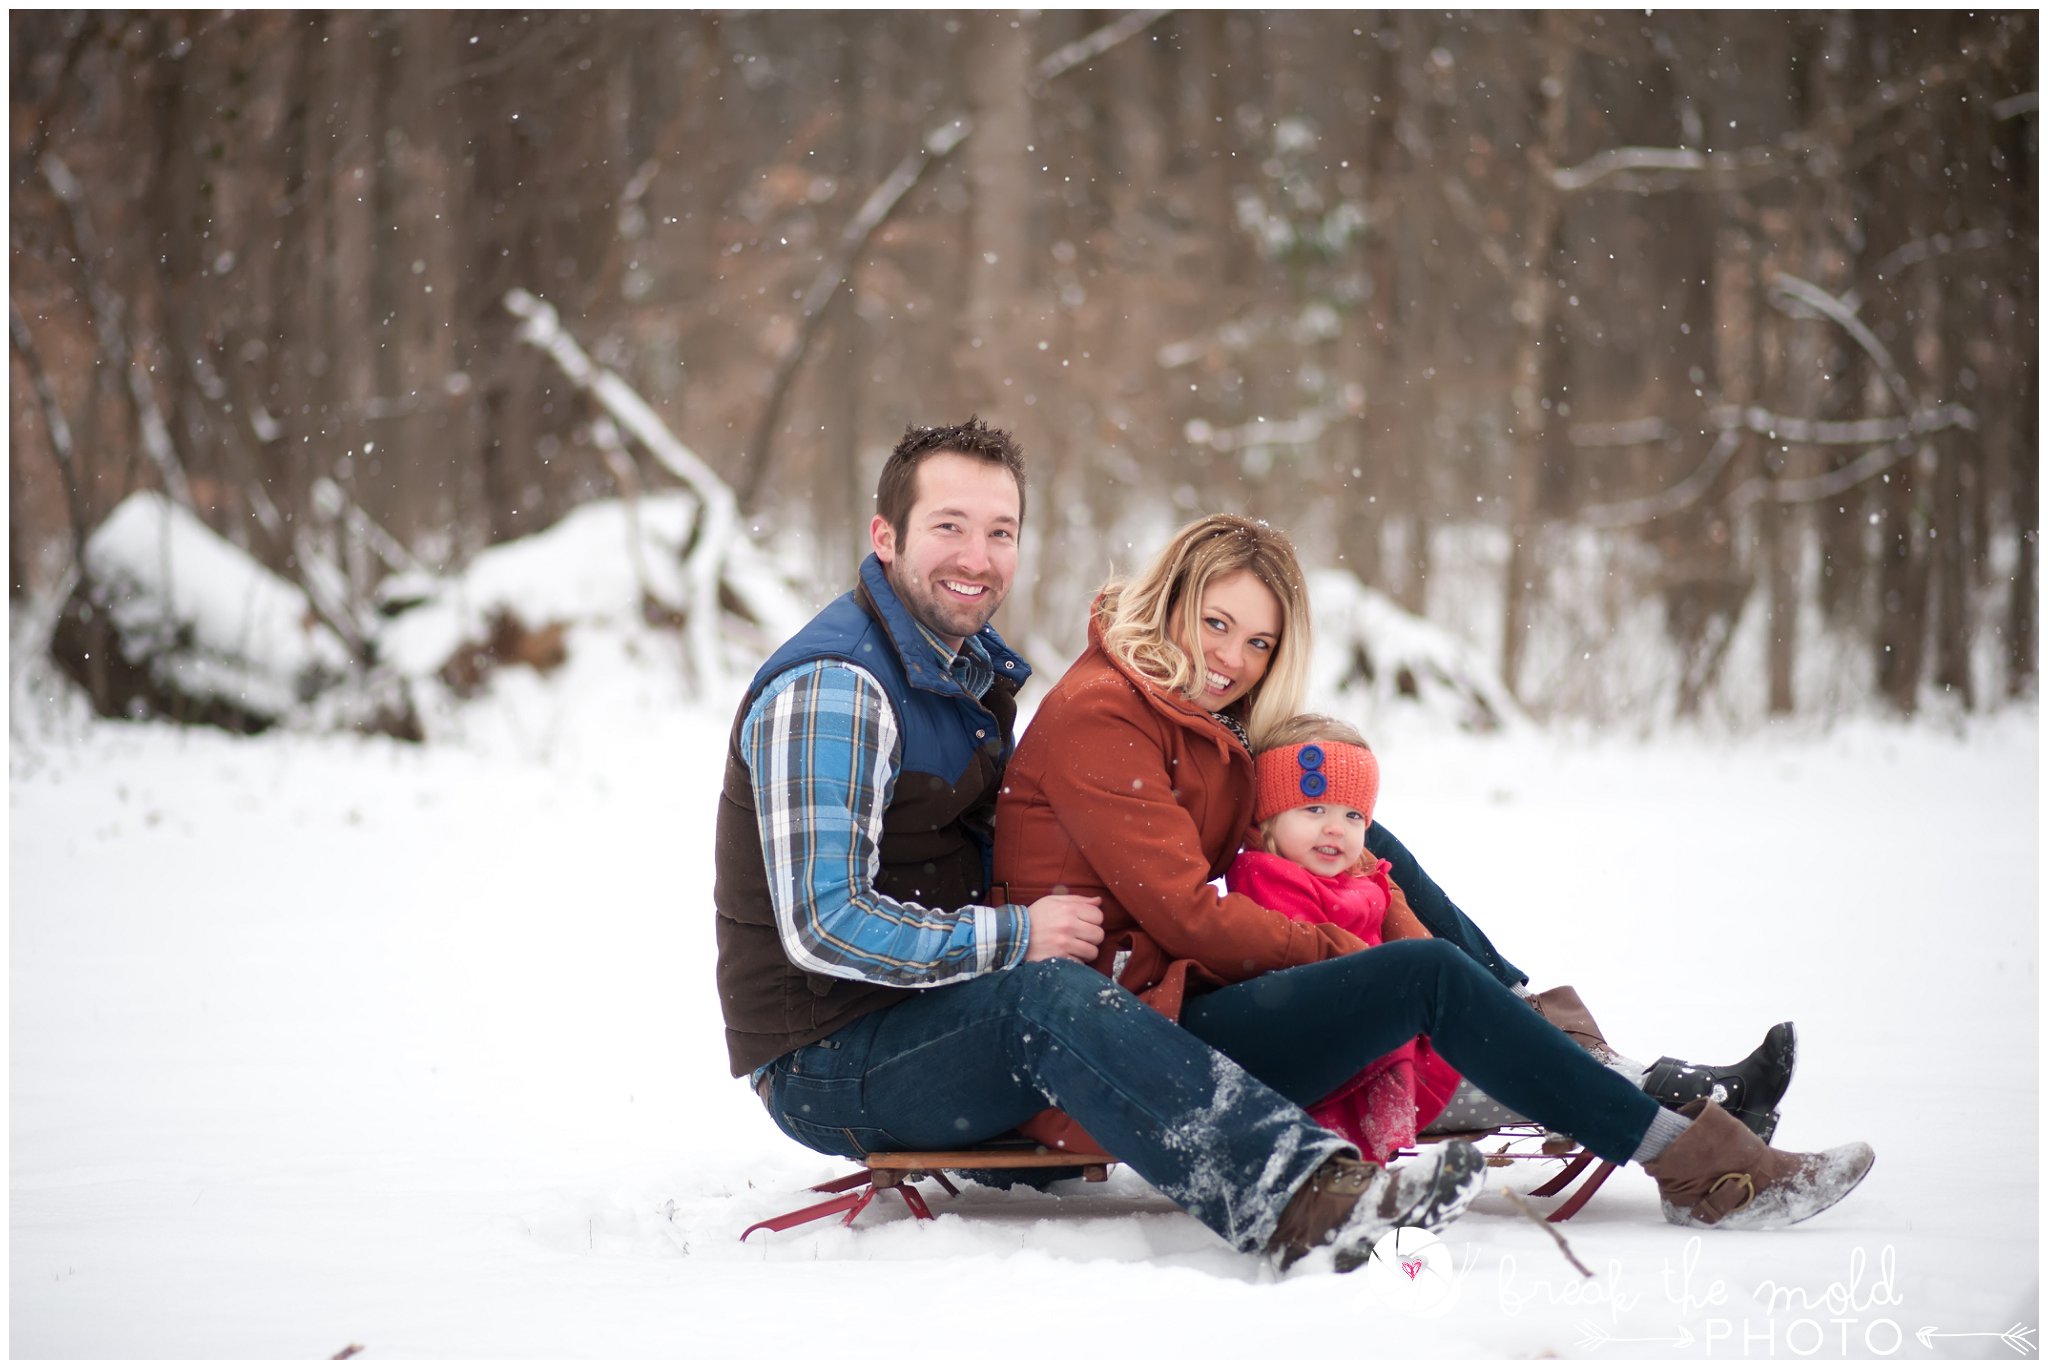 break-the-mold-photo-snowy-day-engagement-photos-knoxville-tn-tennessee-snow-day-pictures-winter-outdoor-unique-family_1513.jpg